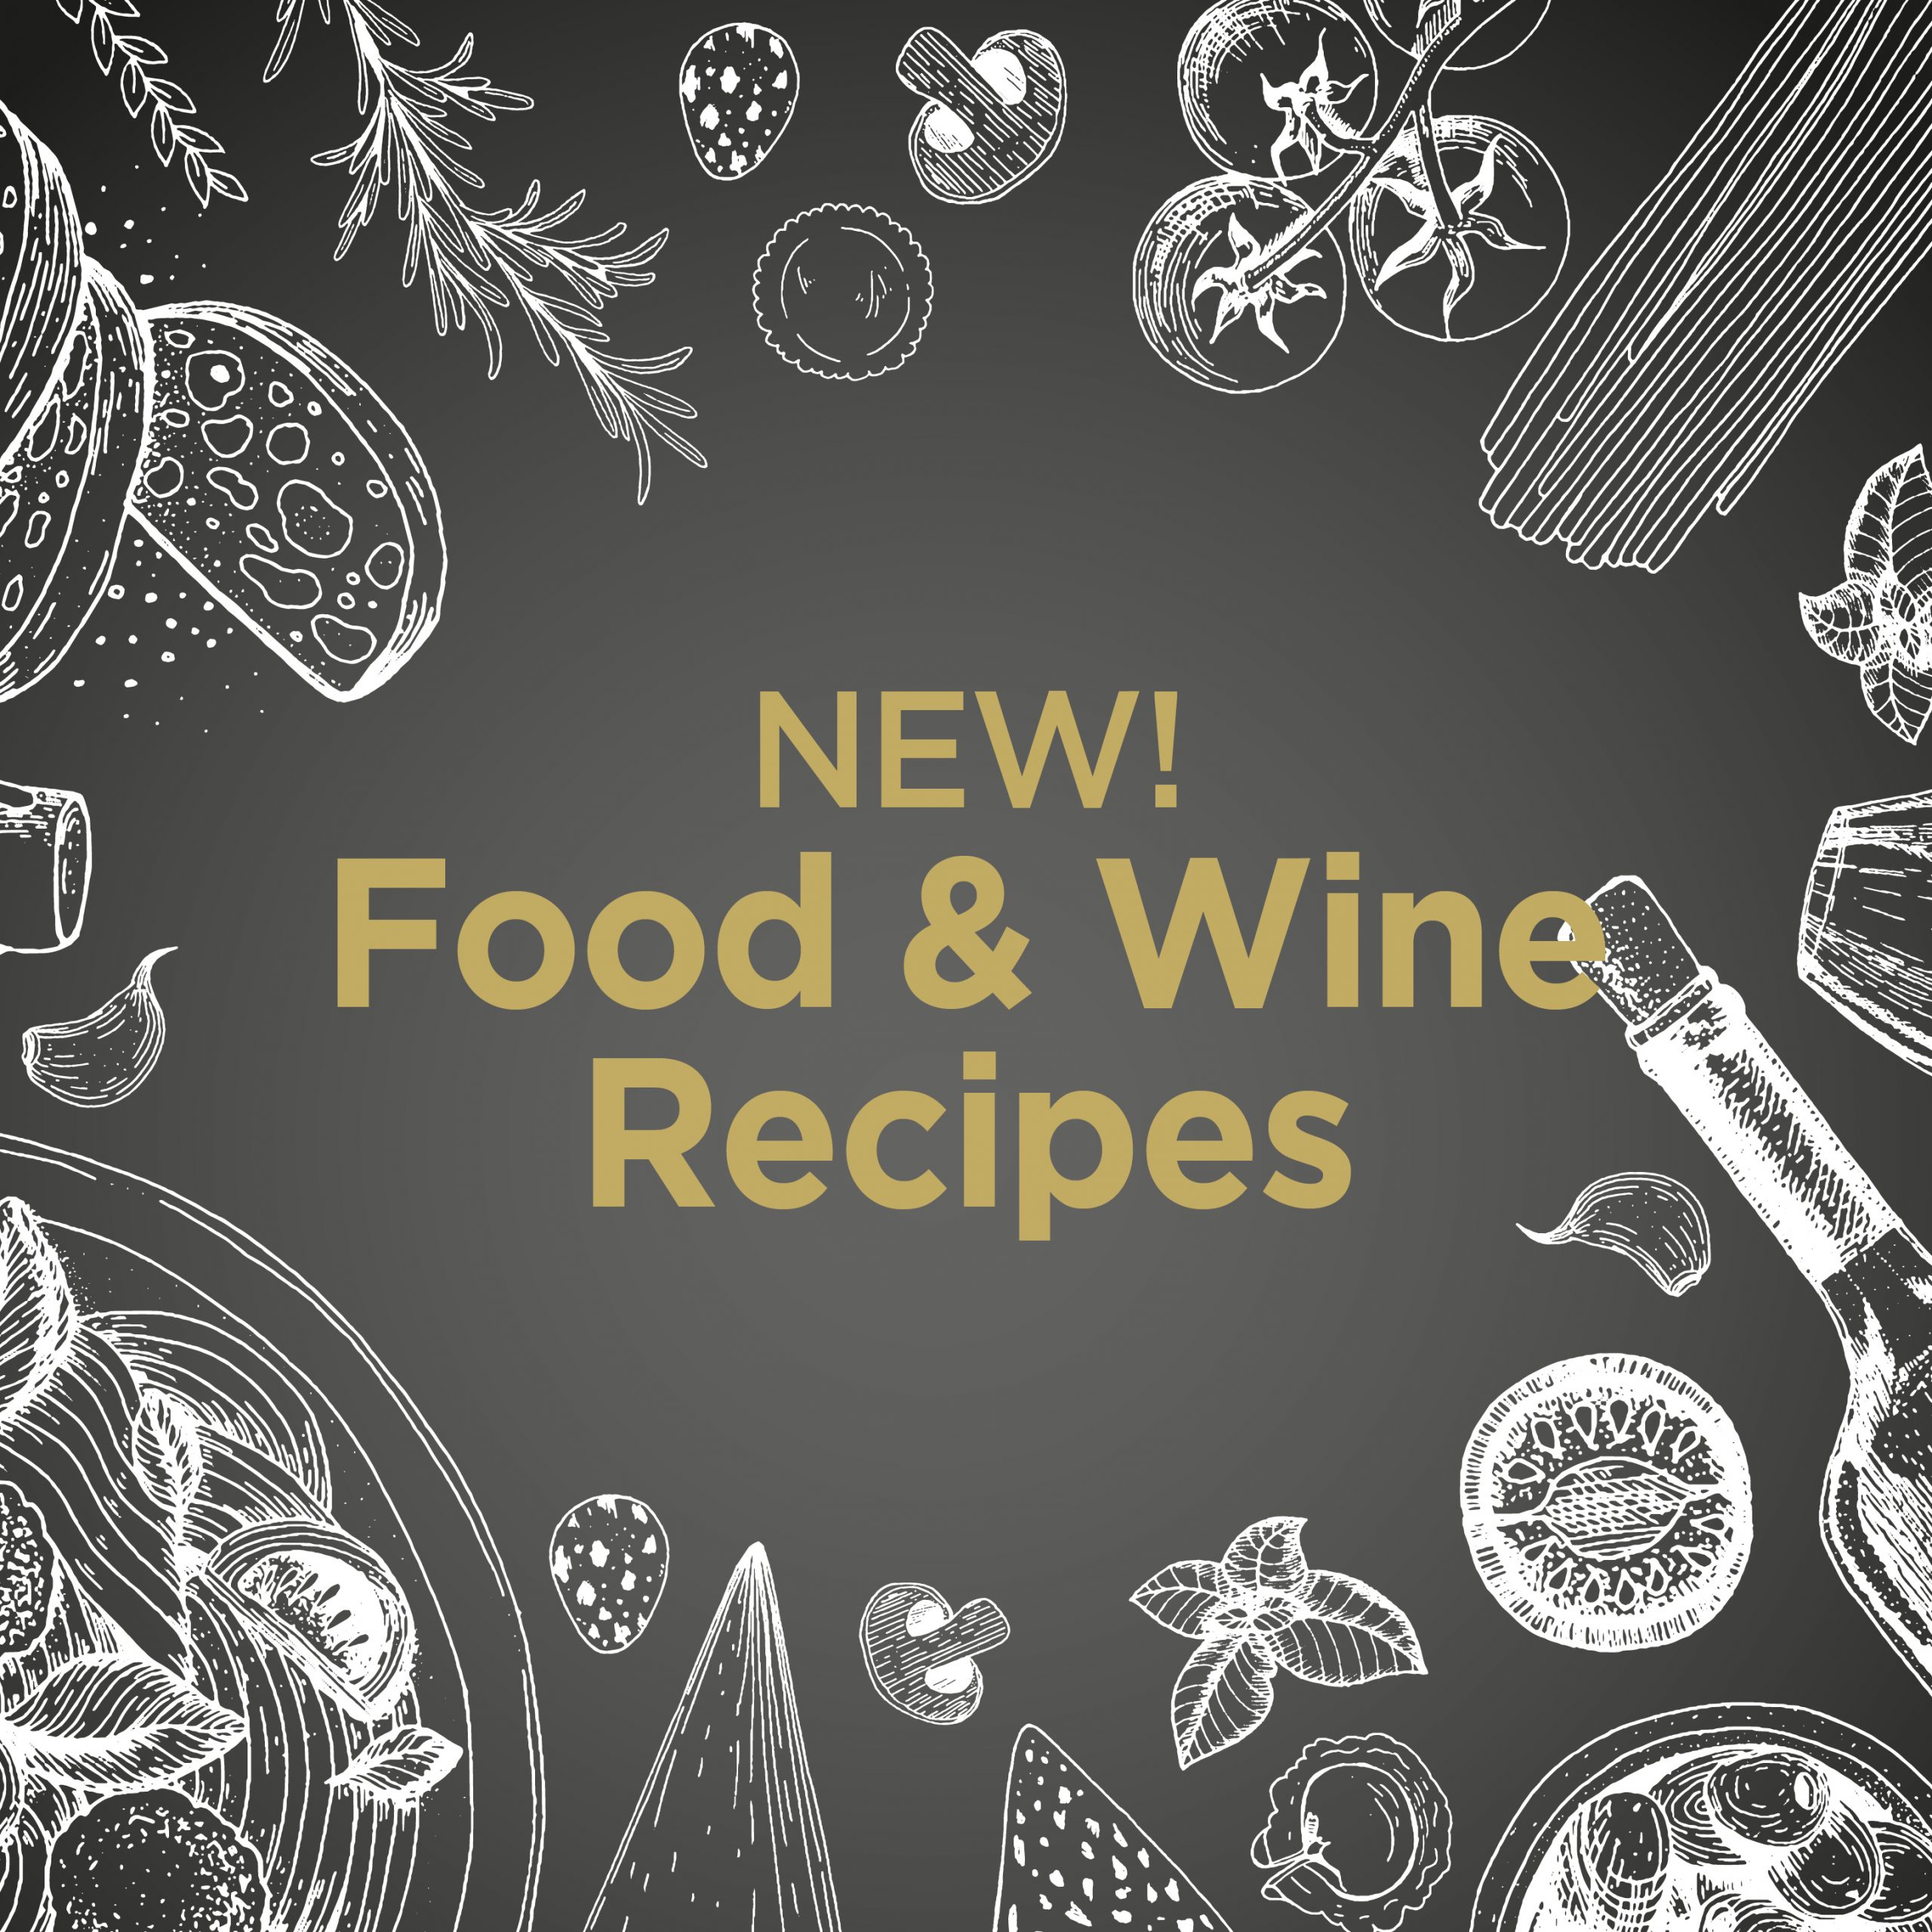 New Food and Wine Recipes News Post